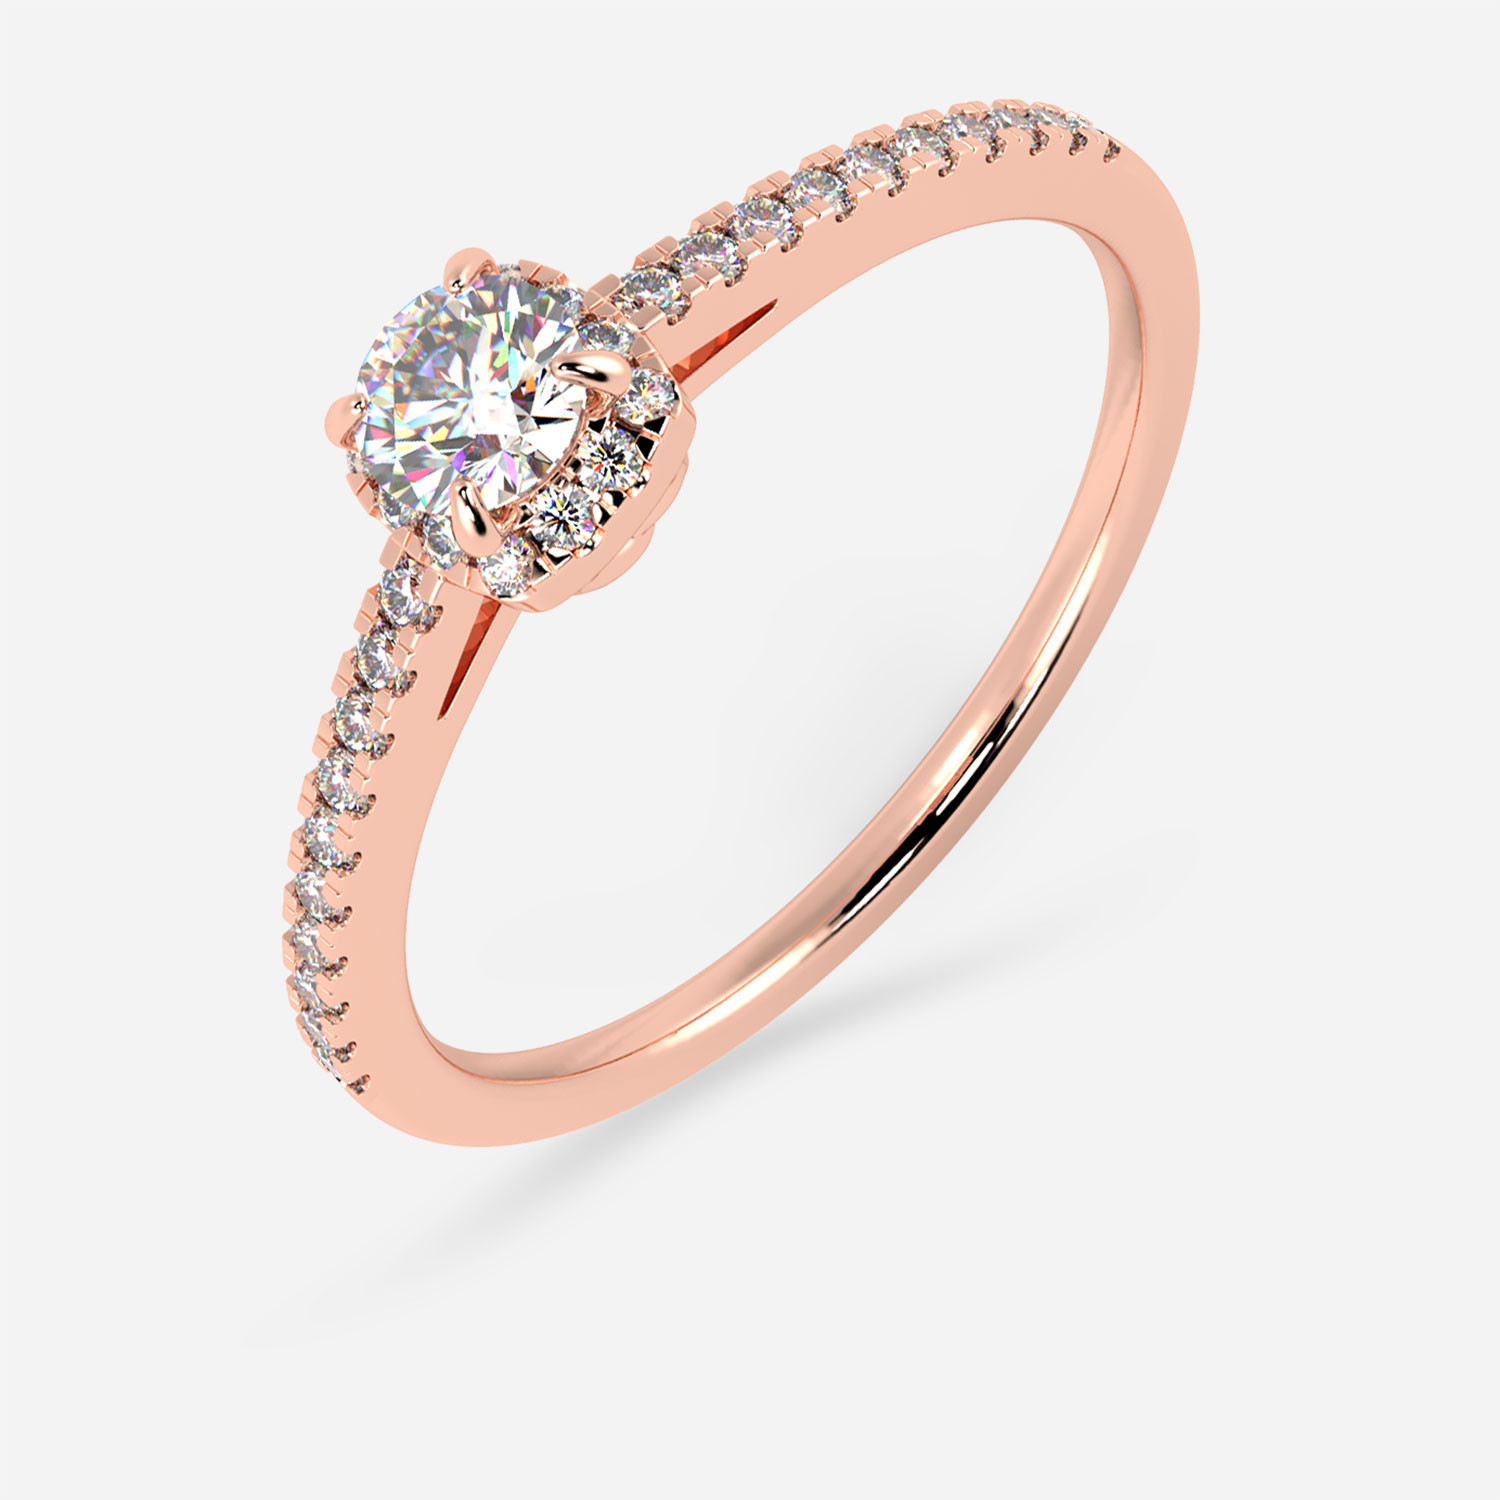 Malabar Gold and Diamonds 18k (750) Rose Gold and Diamond Ring for Women :  Amazon.in: Fashion